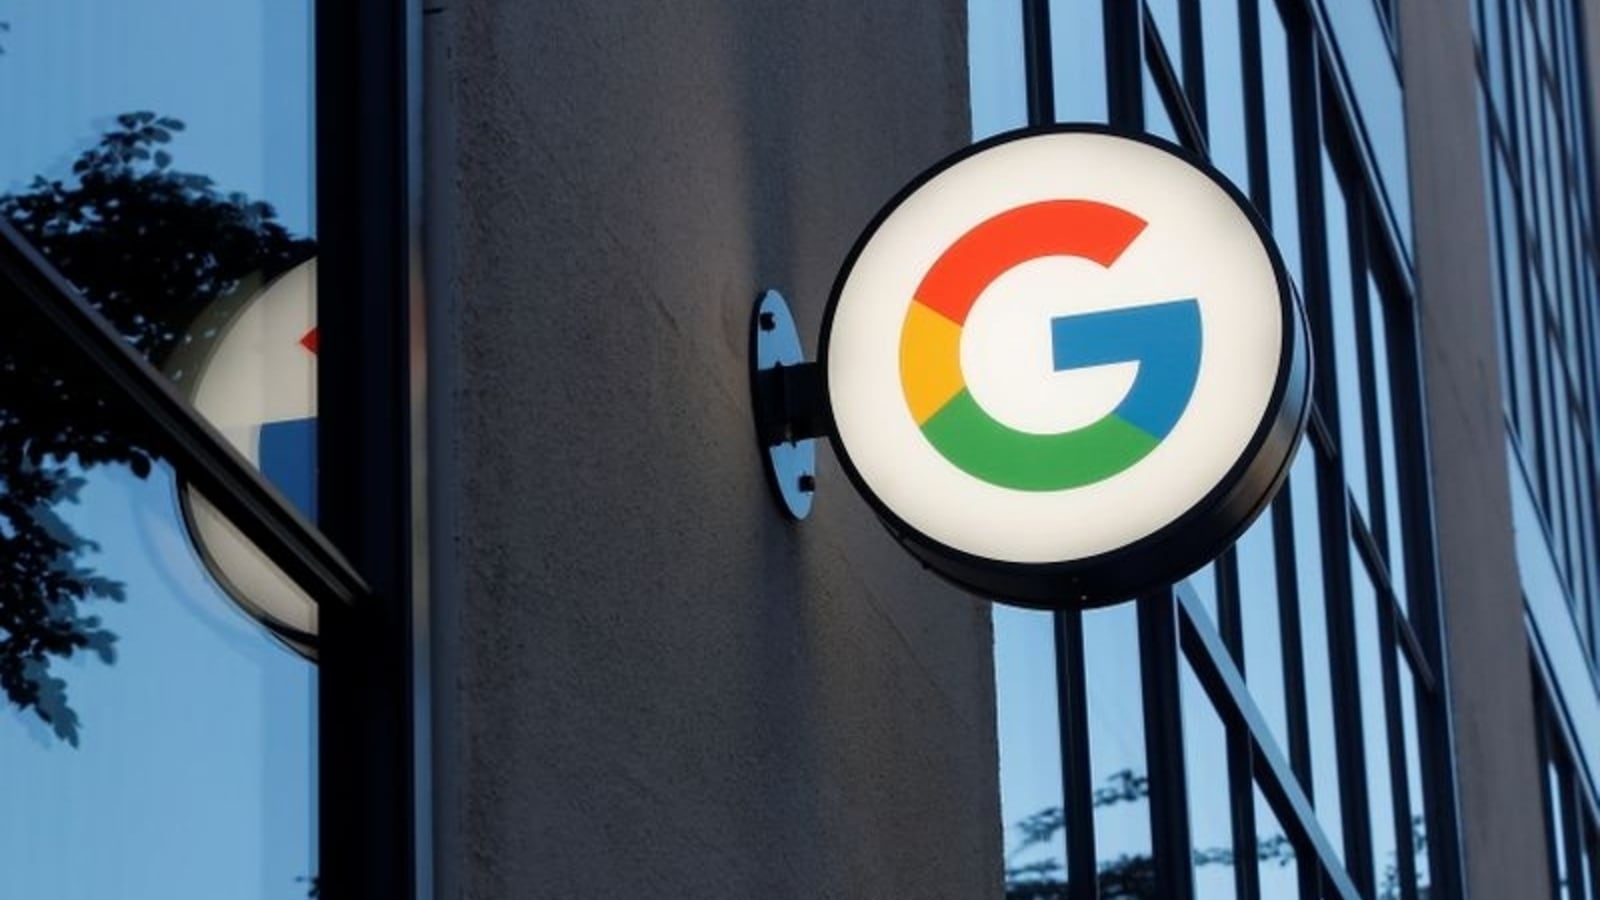 Google’s parent Alphabet reports slowest quarterly growth in 2 years